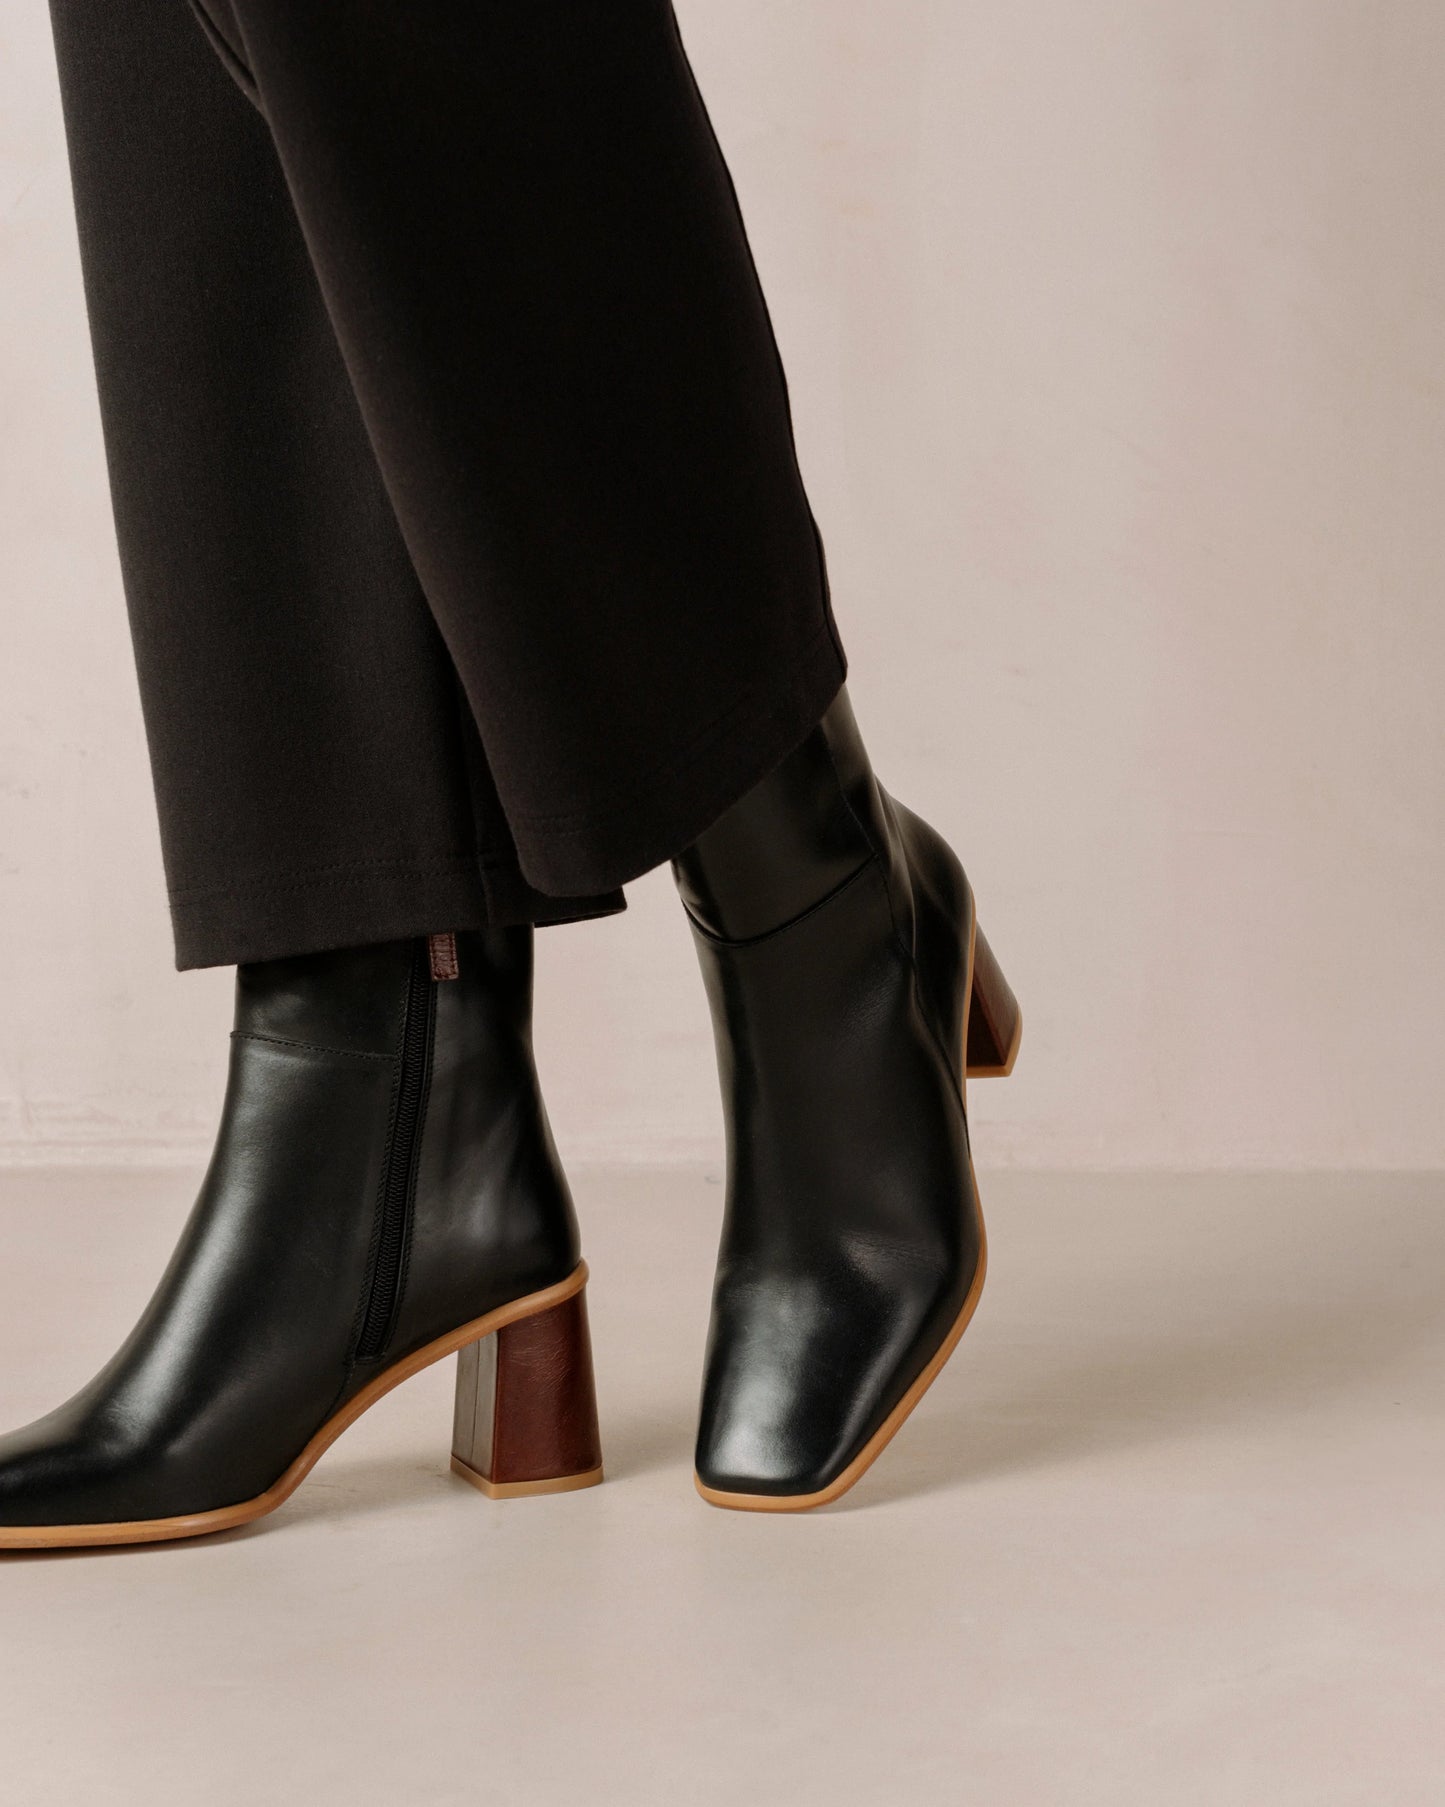 West Vintage Ankle Boots